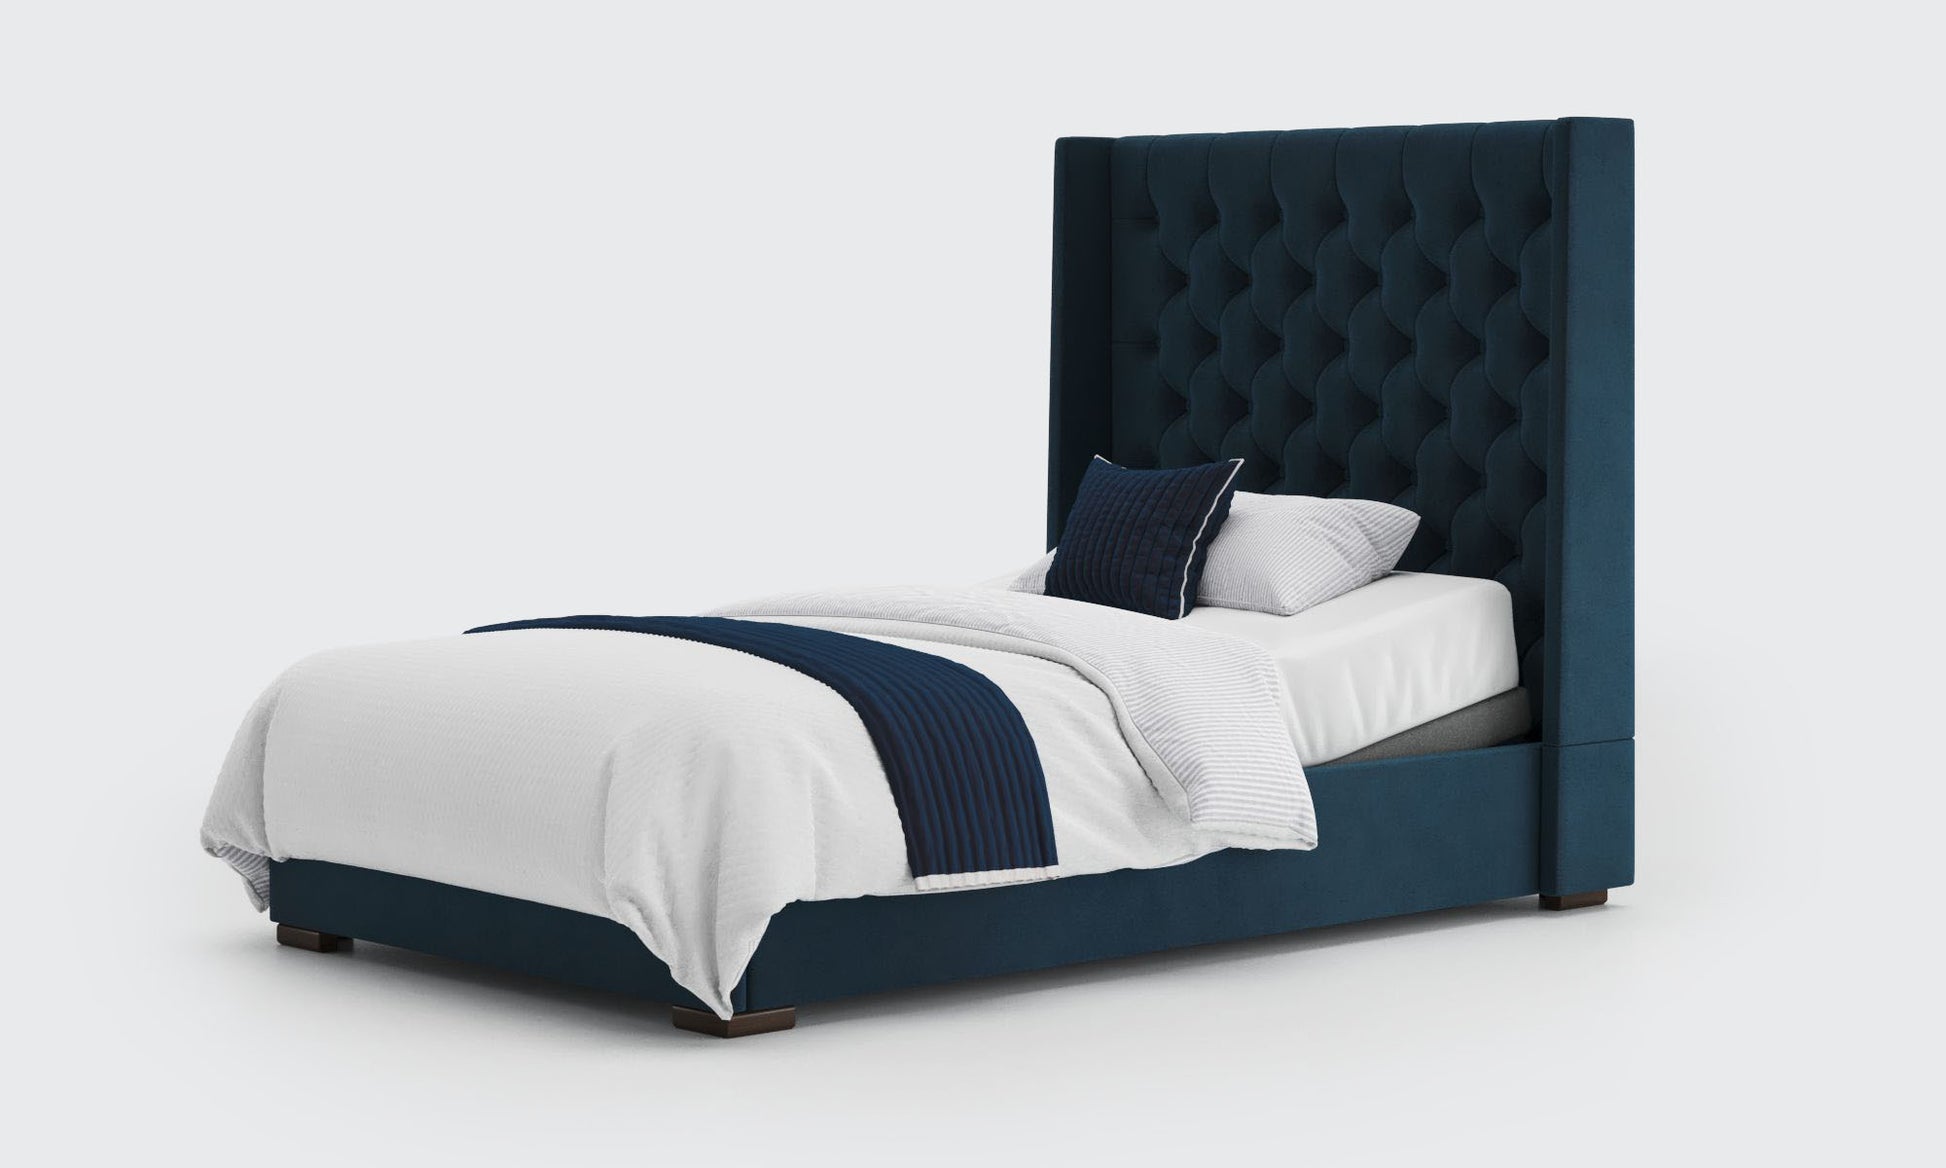 kensington 4ft small double bed and mattress in the royal velvet material